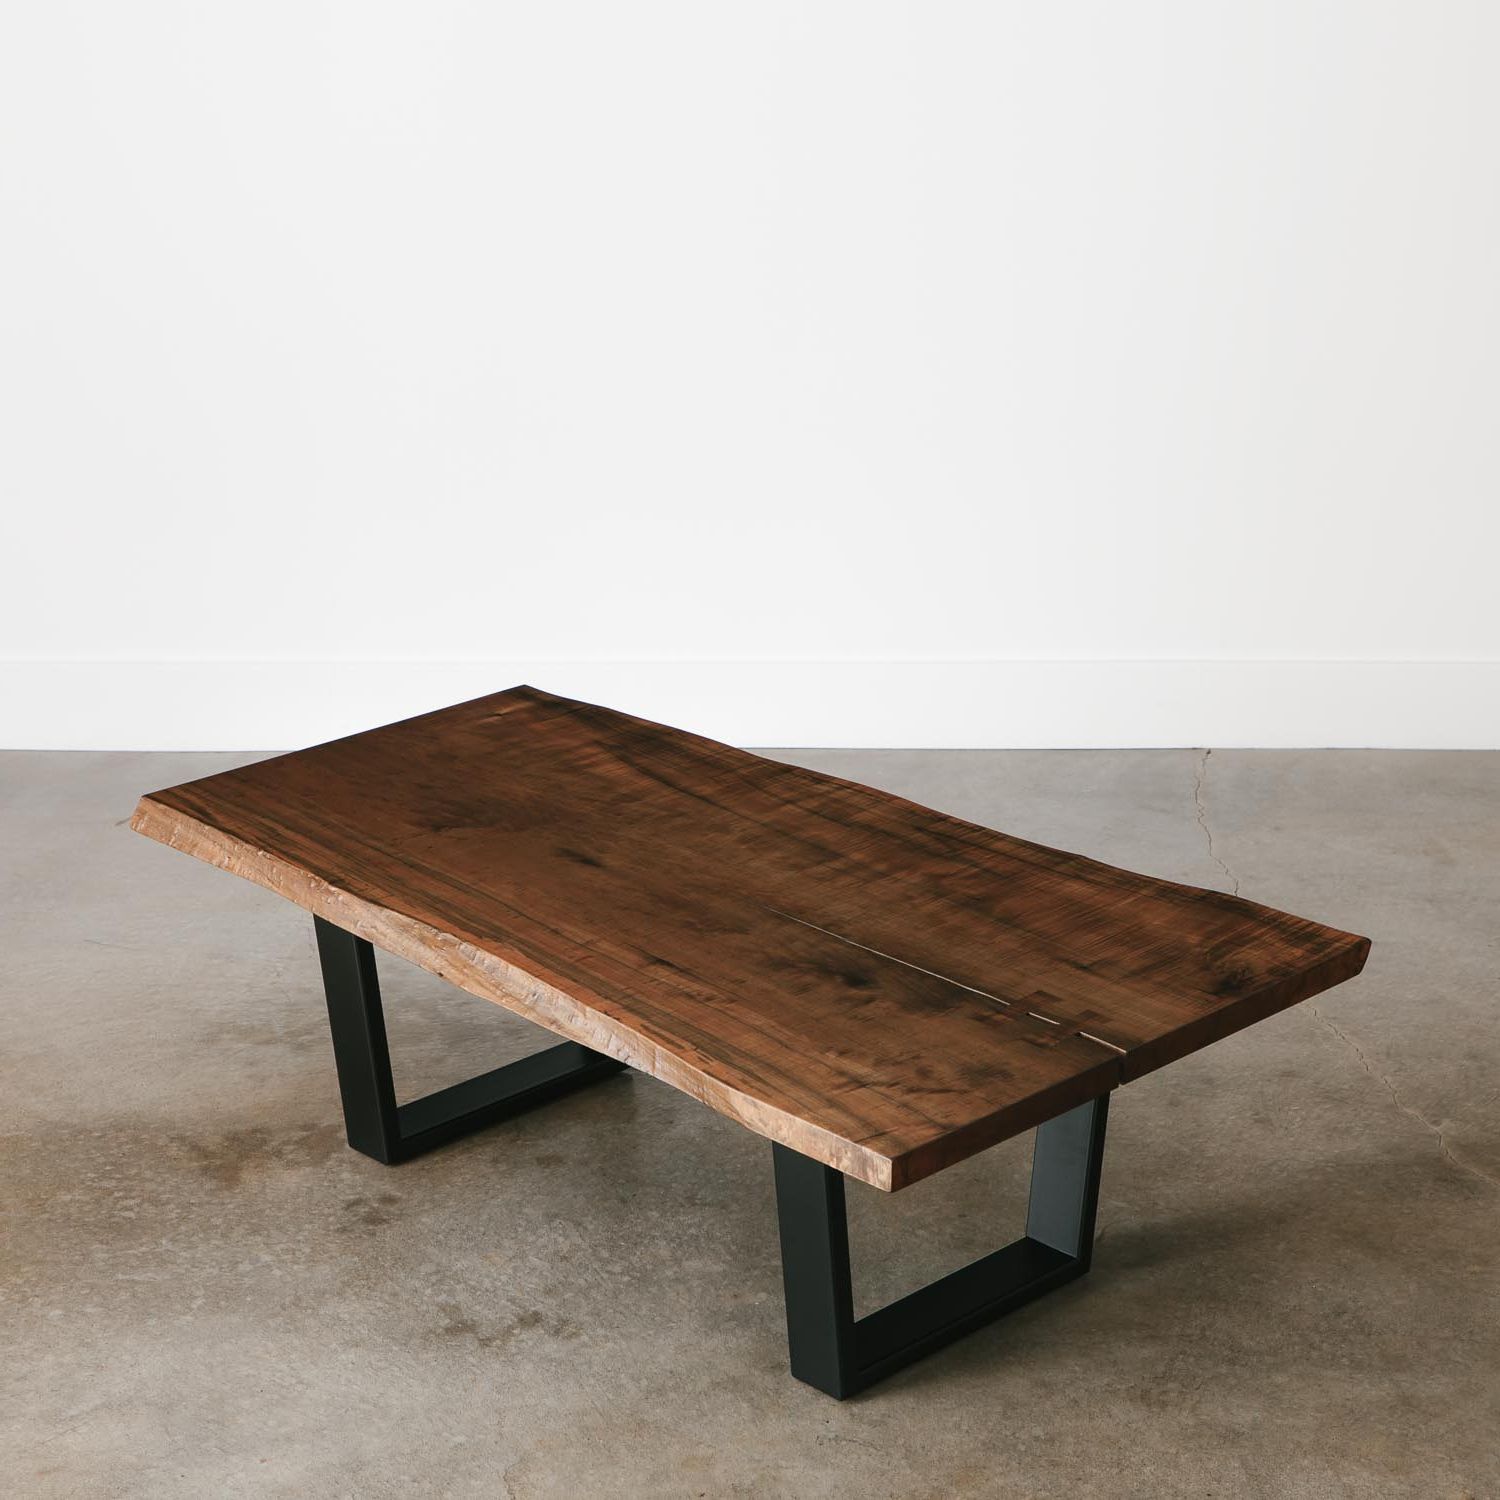 Elko Hardwoods For Well Known Oxidized Coffee Tables (View 1 of 20)